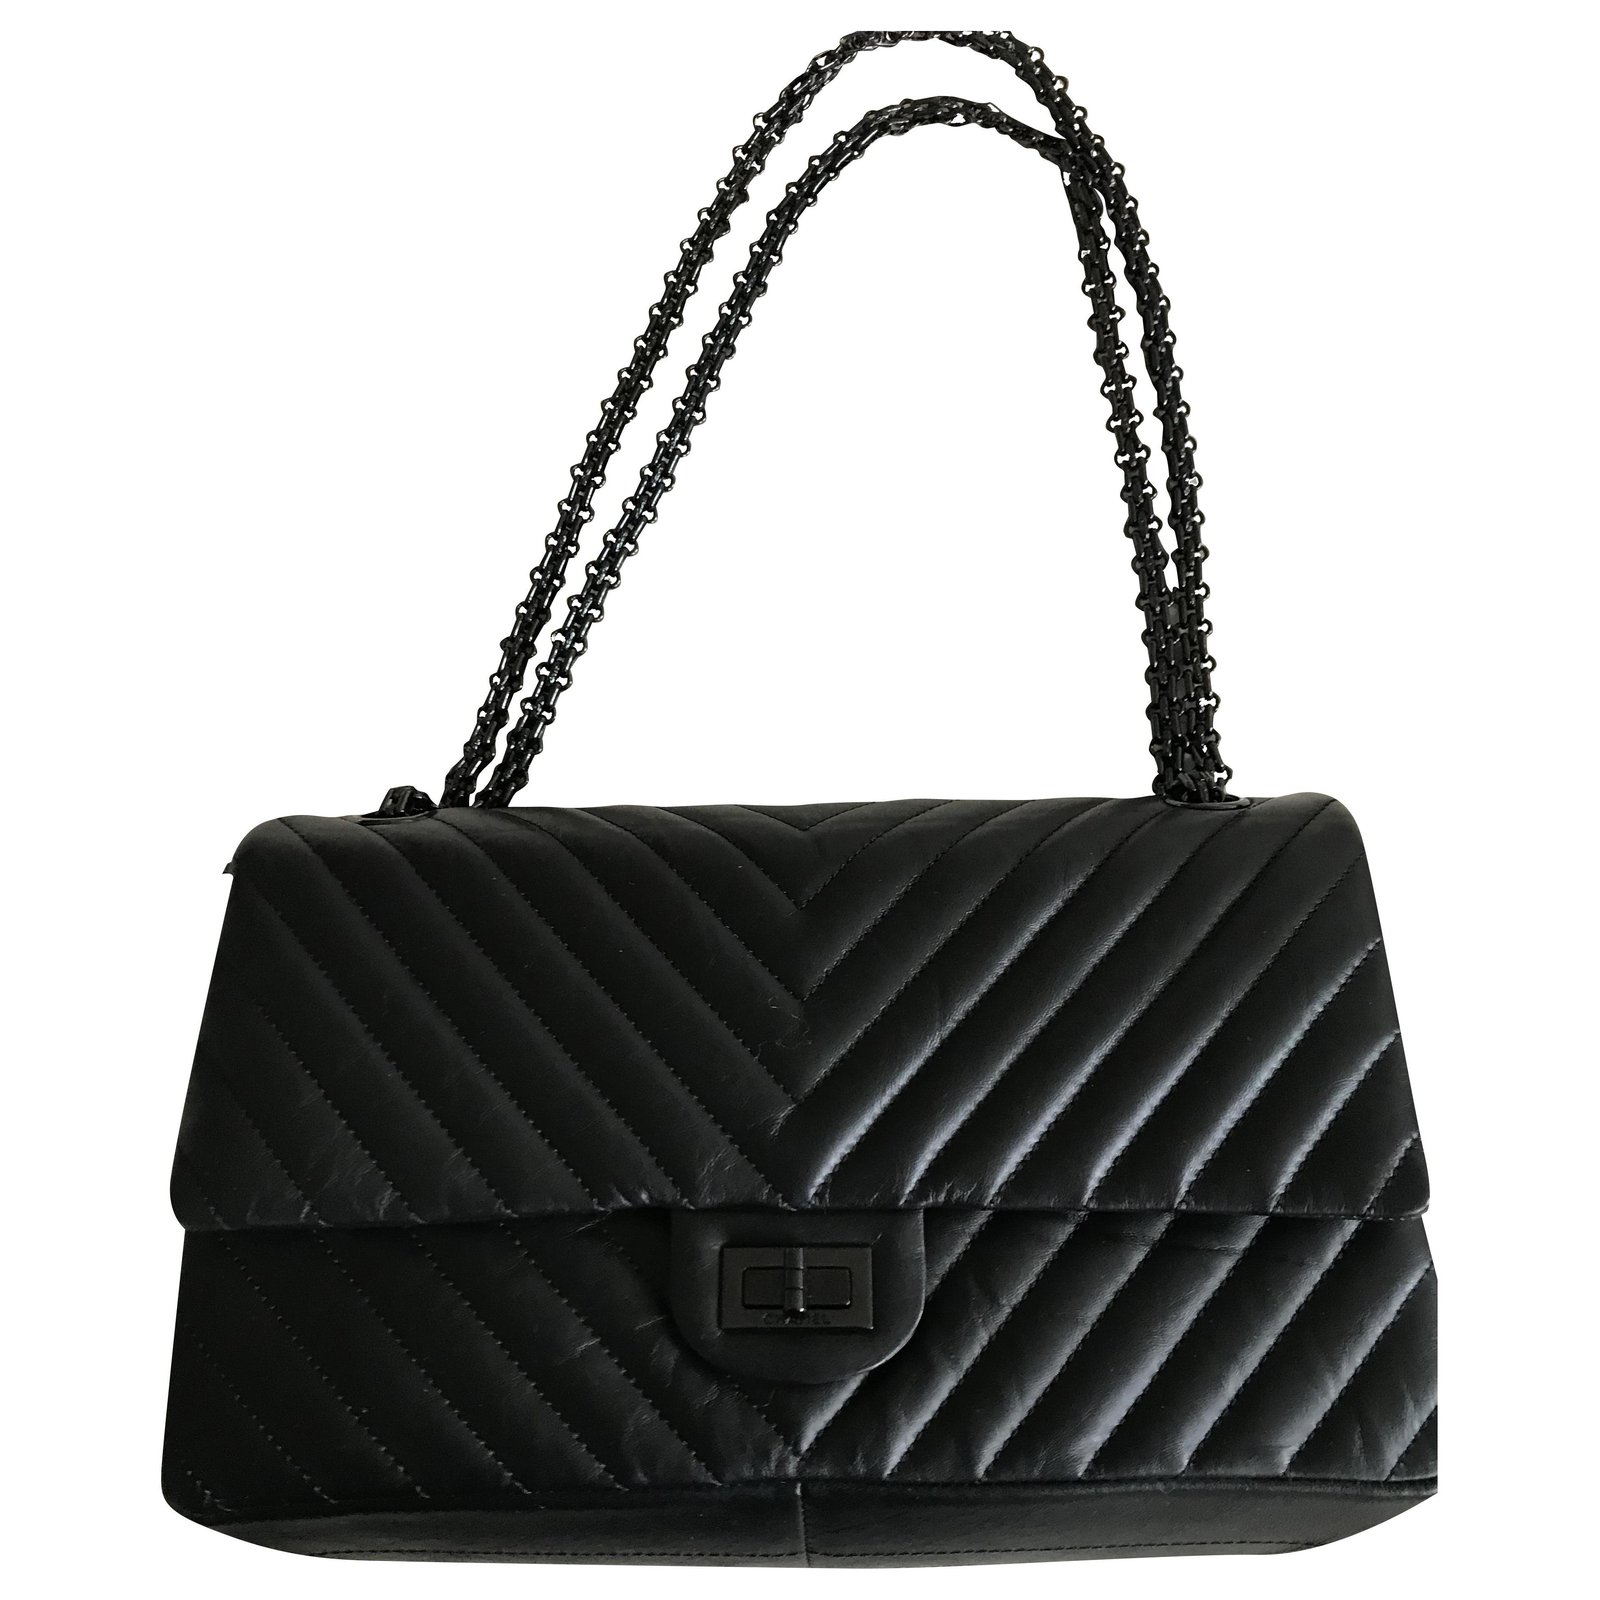 2.55 Chanel Timeless Classic Reissue Chevron SO BLACK Leather ref